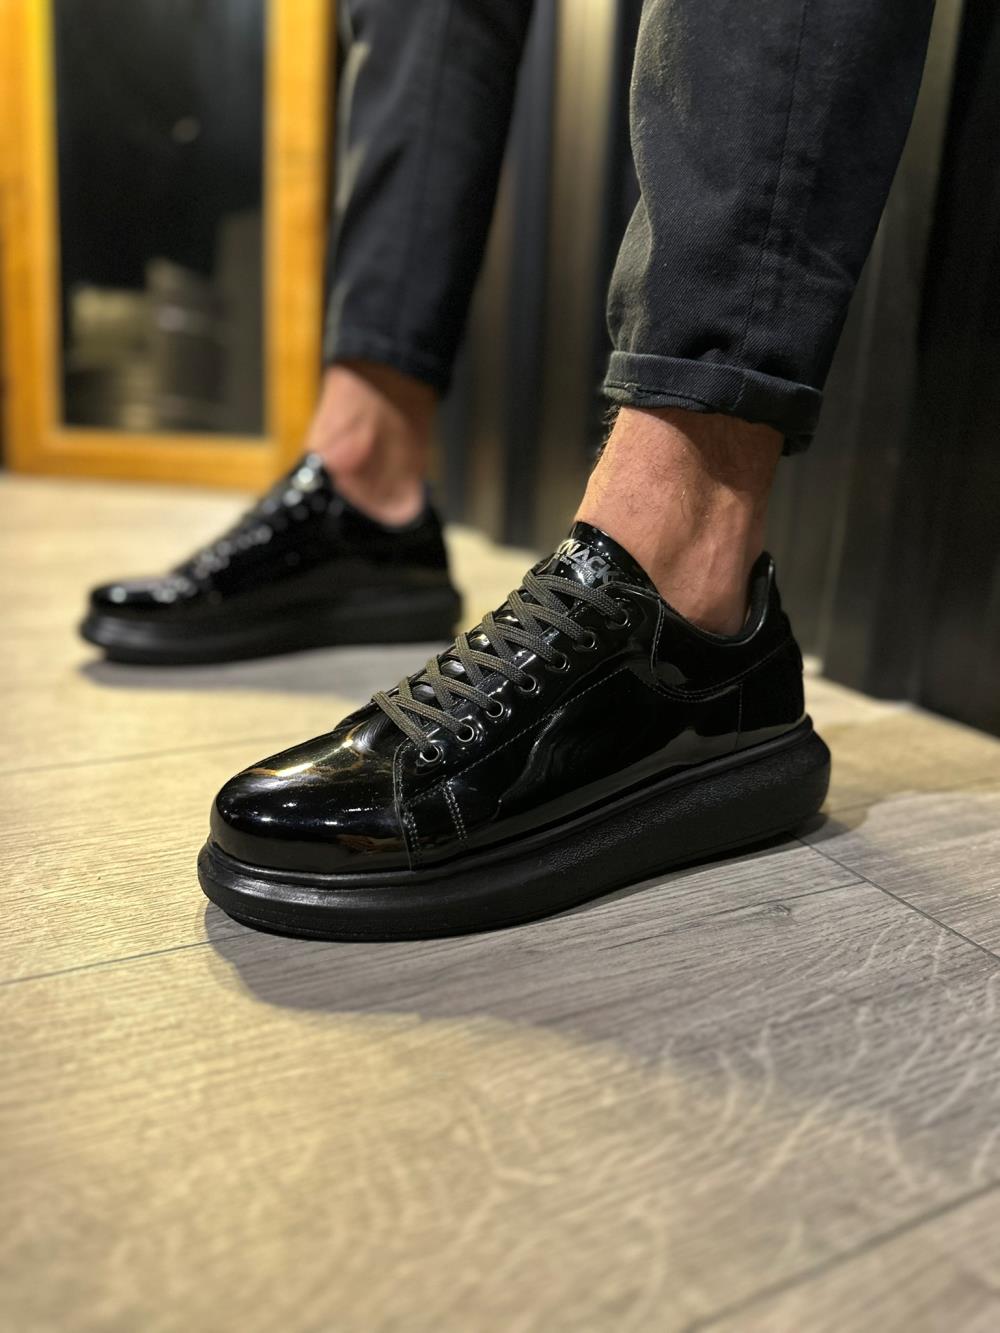 Men's High Sole Casual Shoes 044 Black Patent Leather (Black Sole) - STREETMODE™